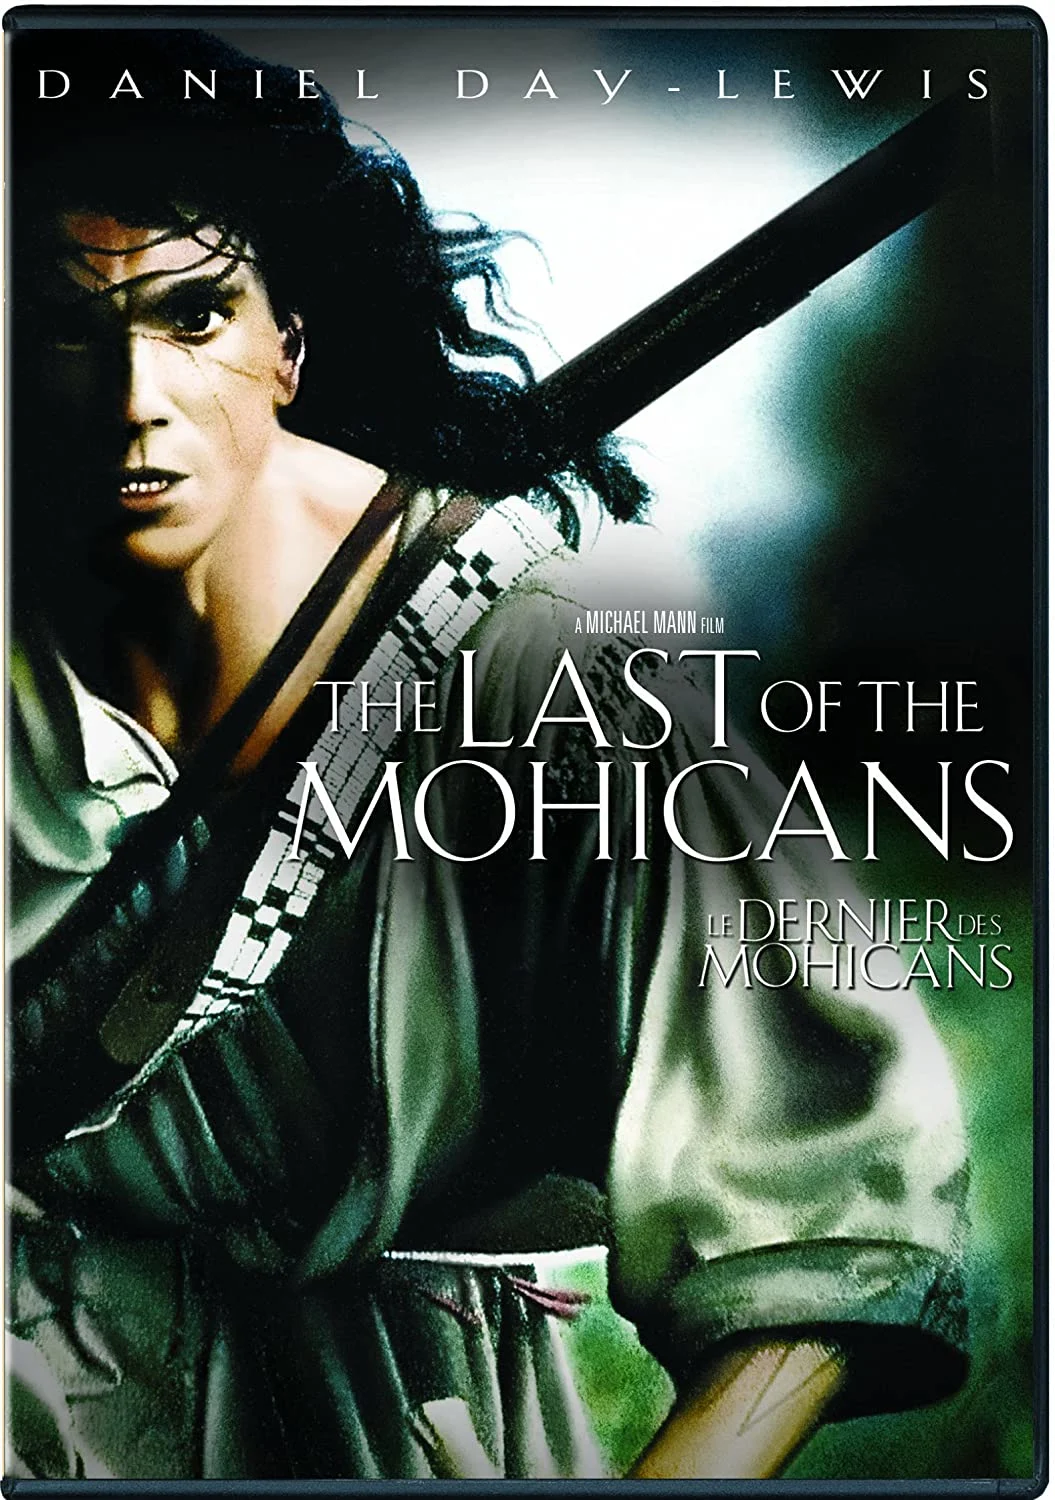 Last of the Mohicans, The (1993) (DVD)